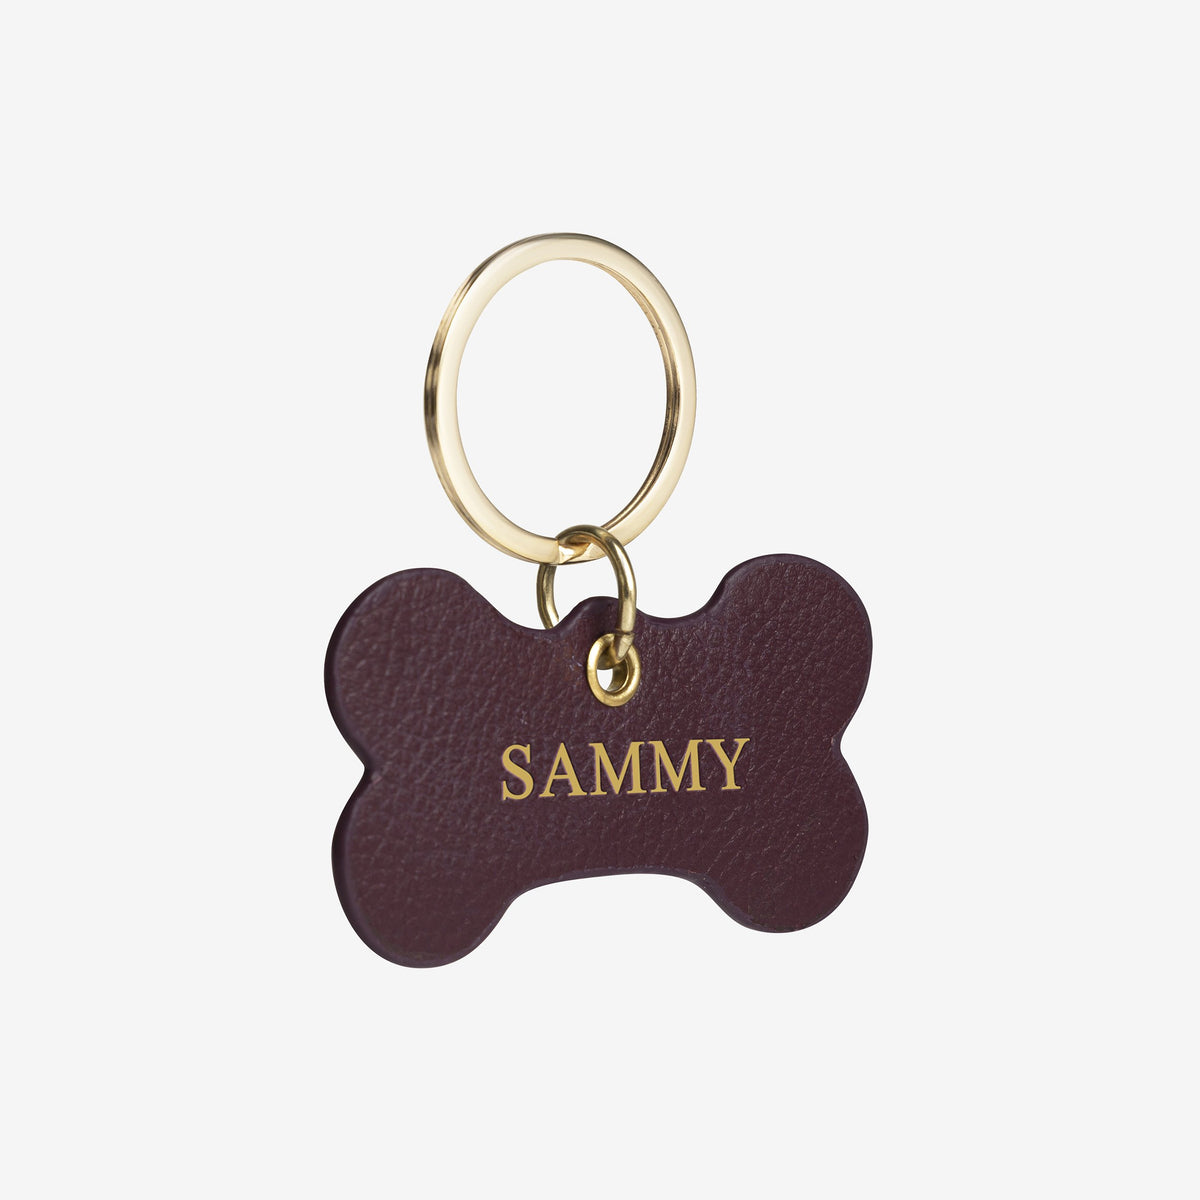 The Messy Corner Dog Tag Personalised Dog Tag - Wine